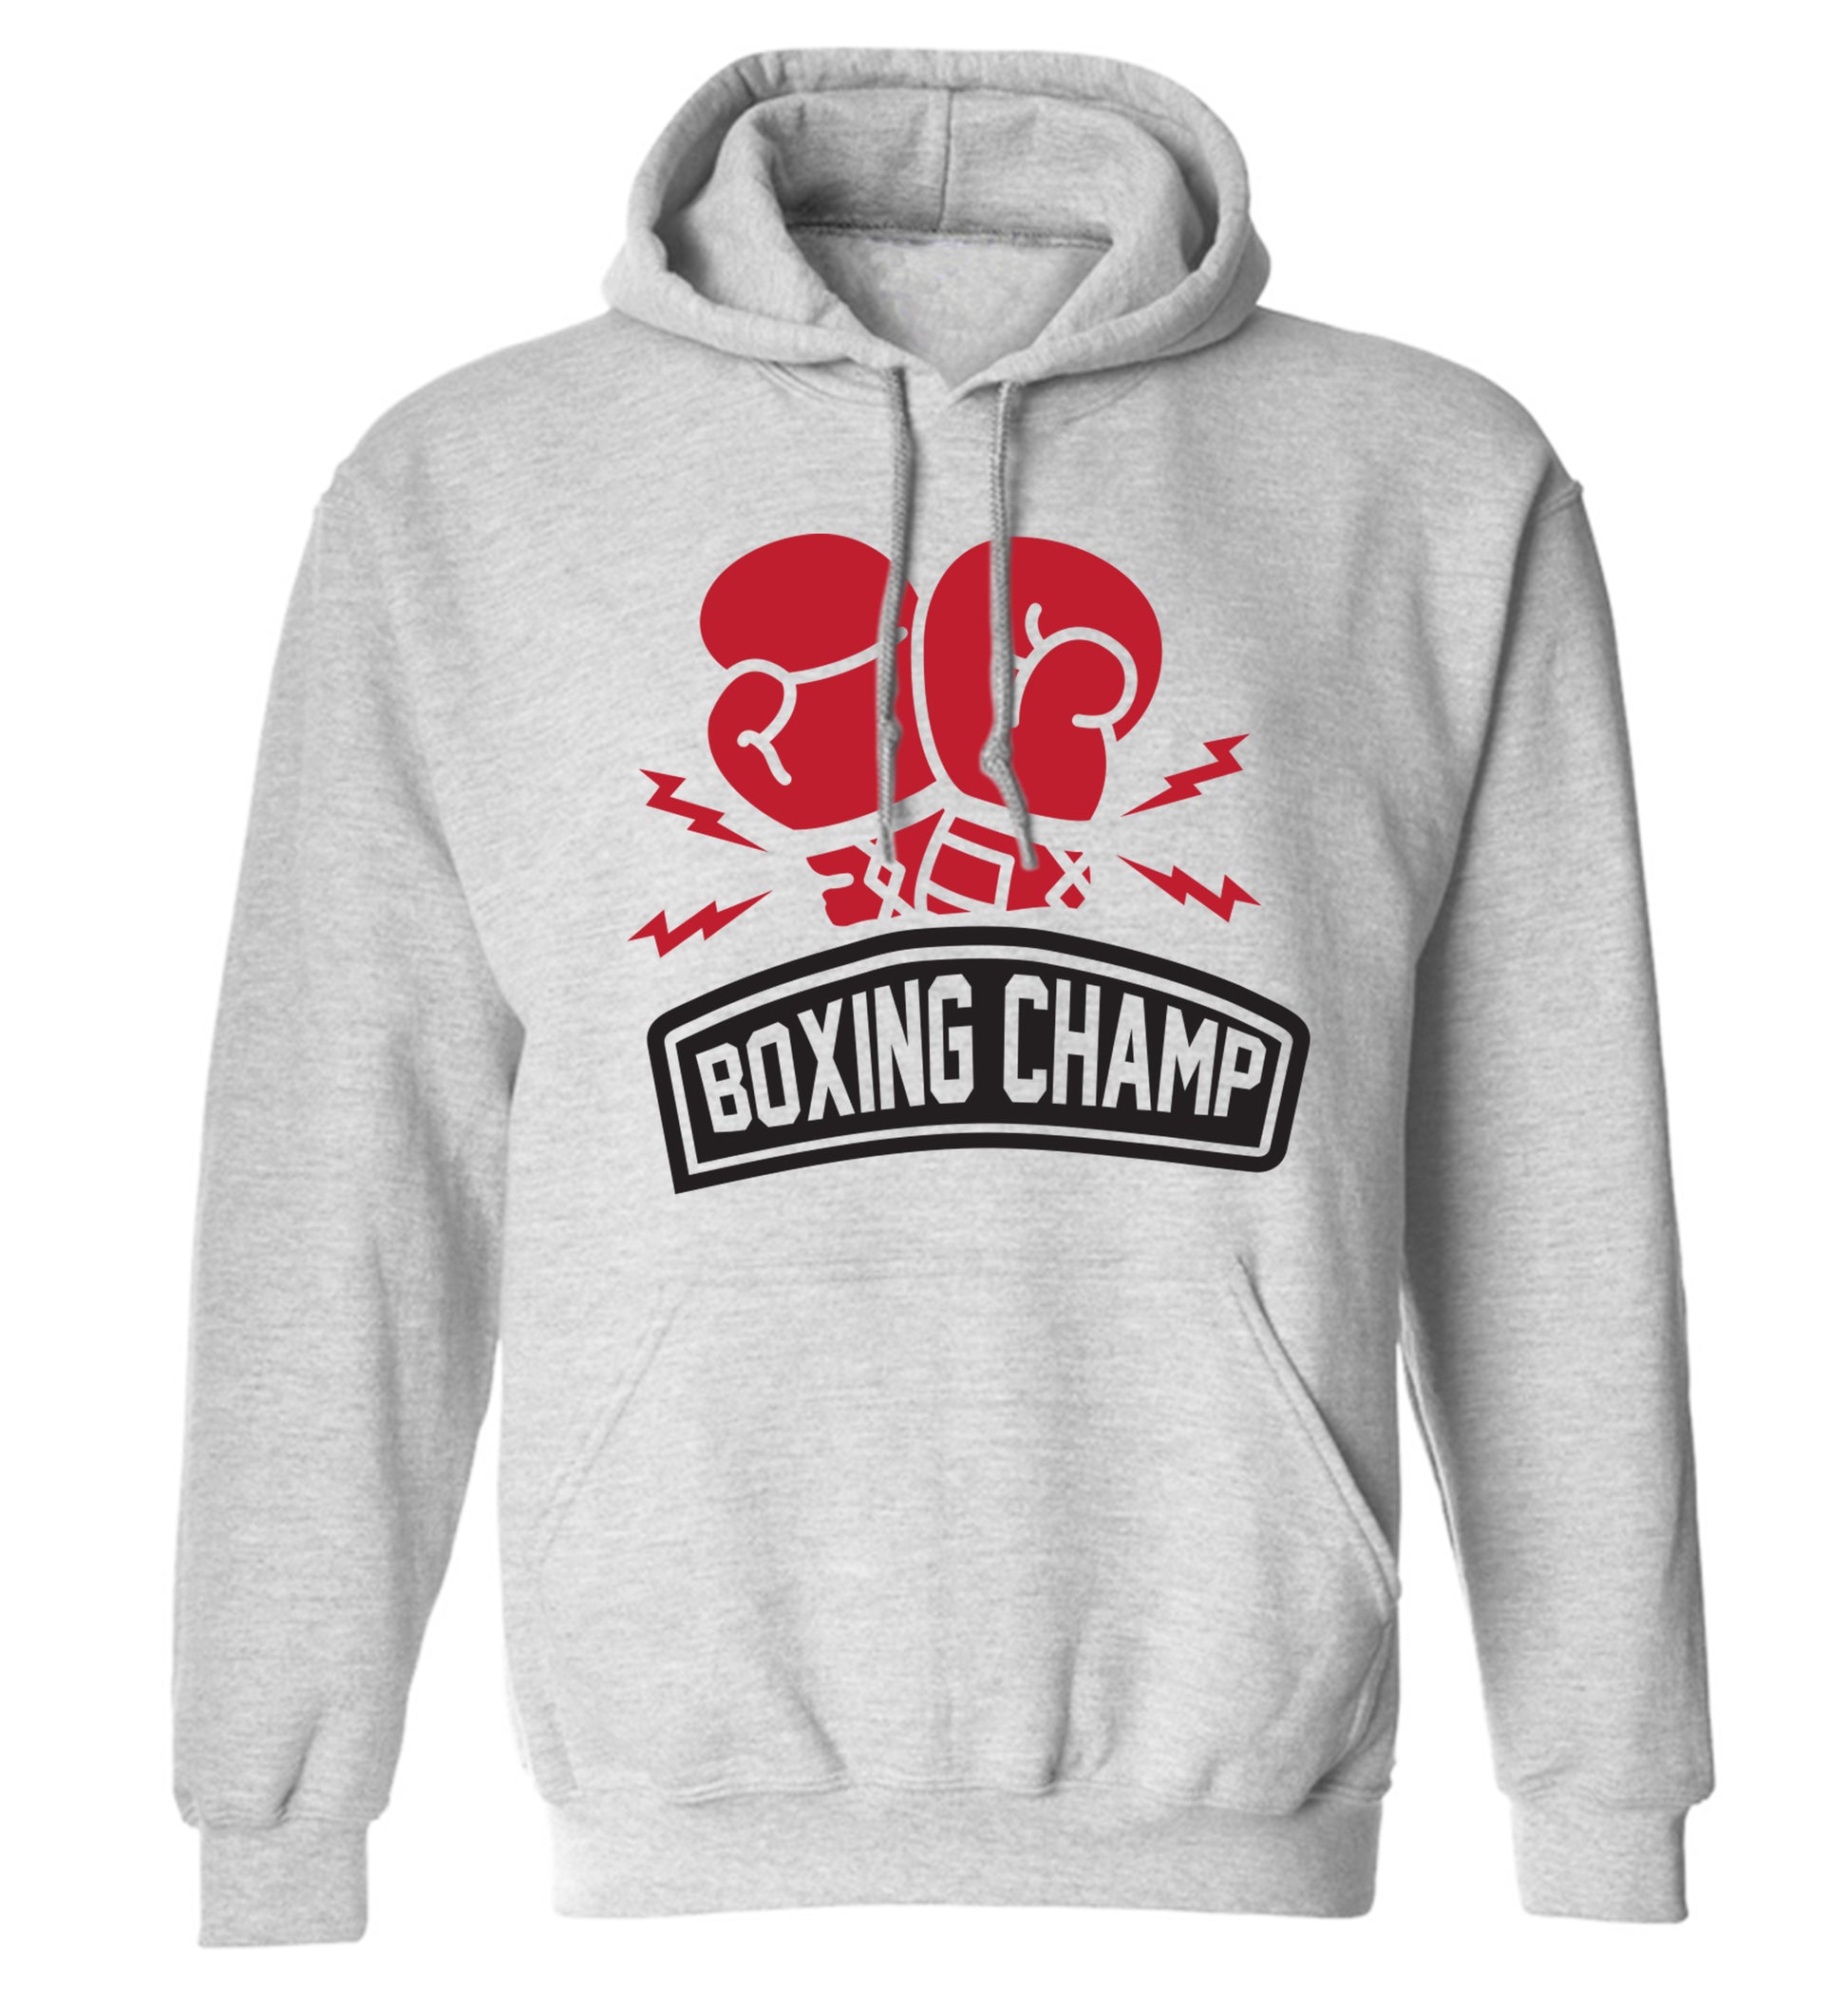 Boxing Champ adults unisex grey hoodie 2XL